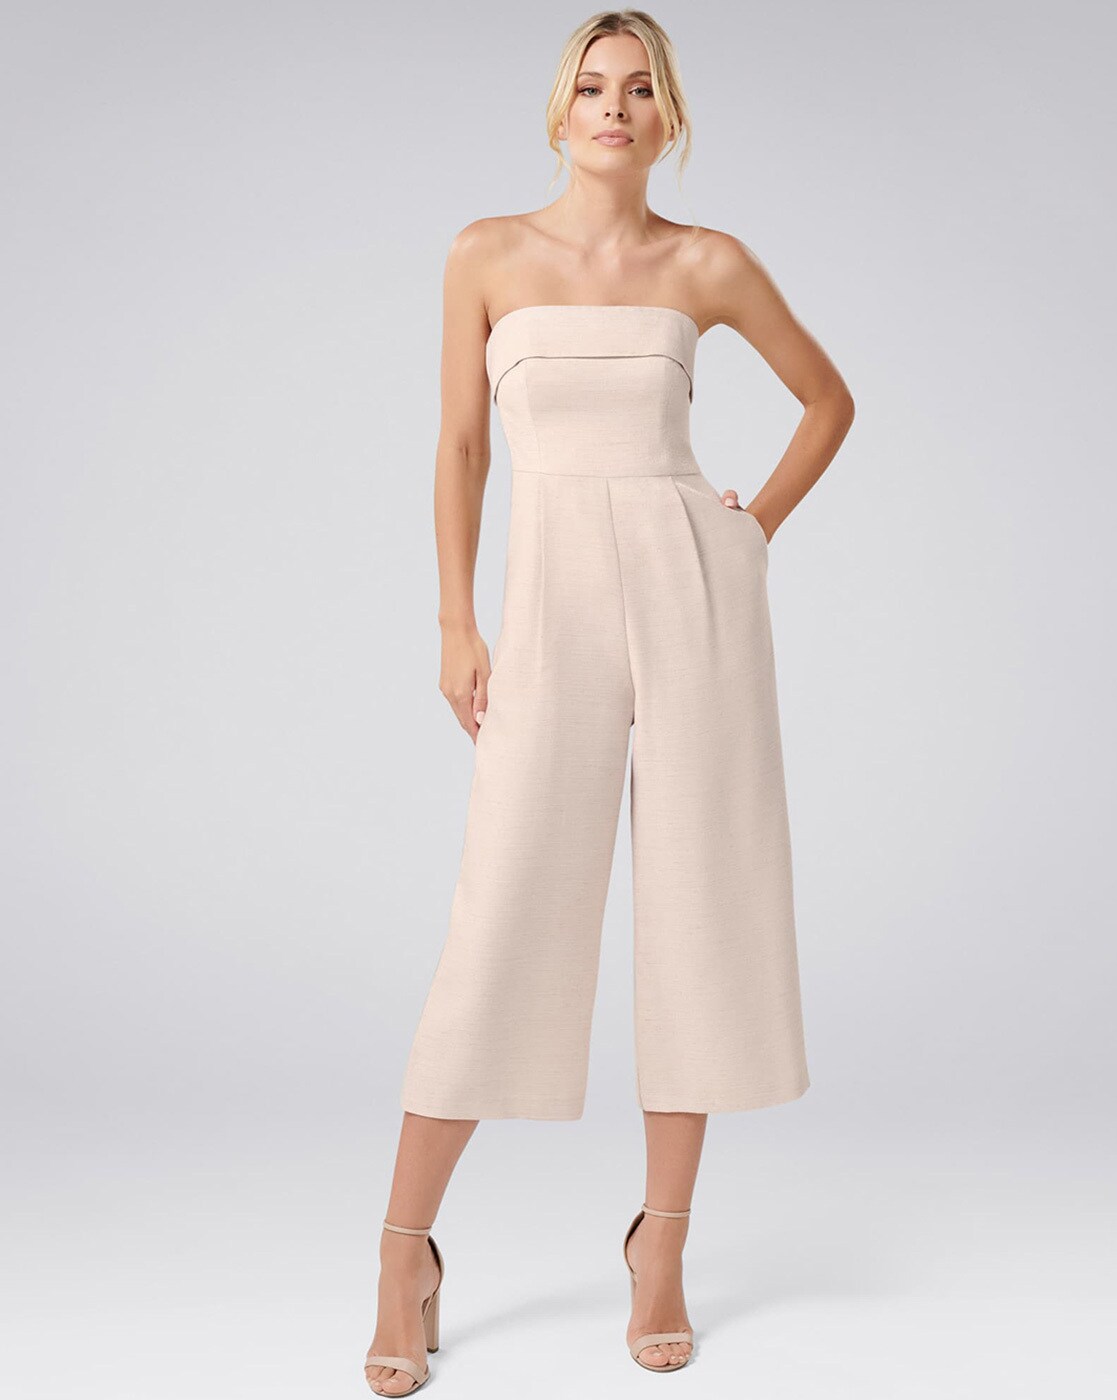 Details more than 70 strapless romper pants latest - in.eteachers